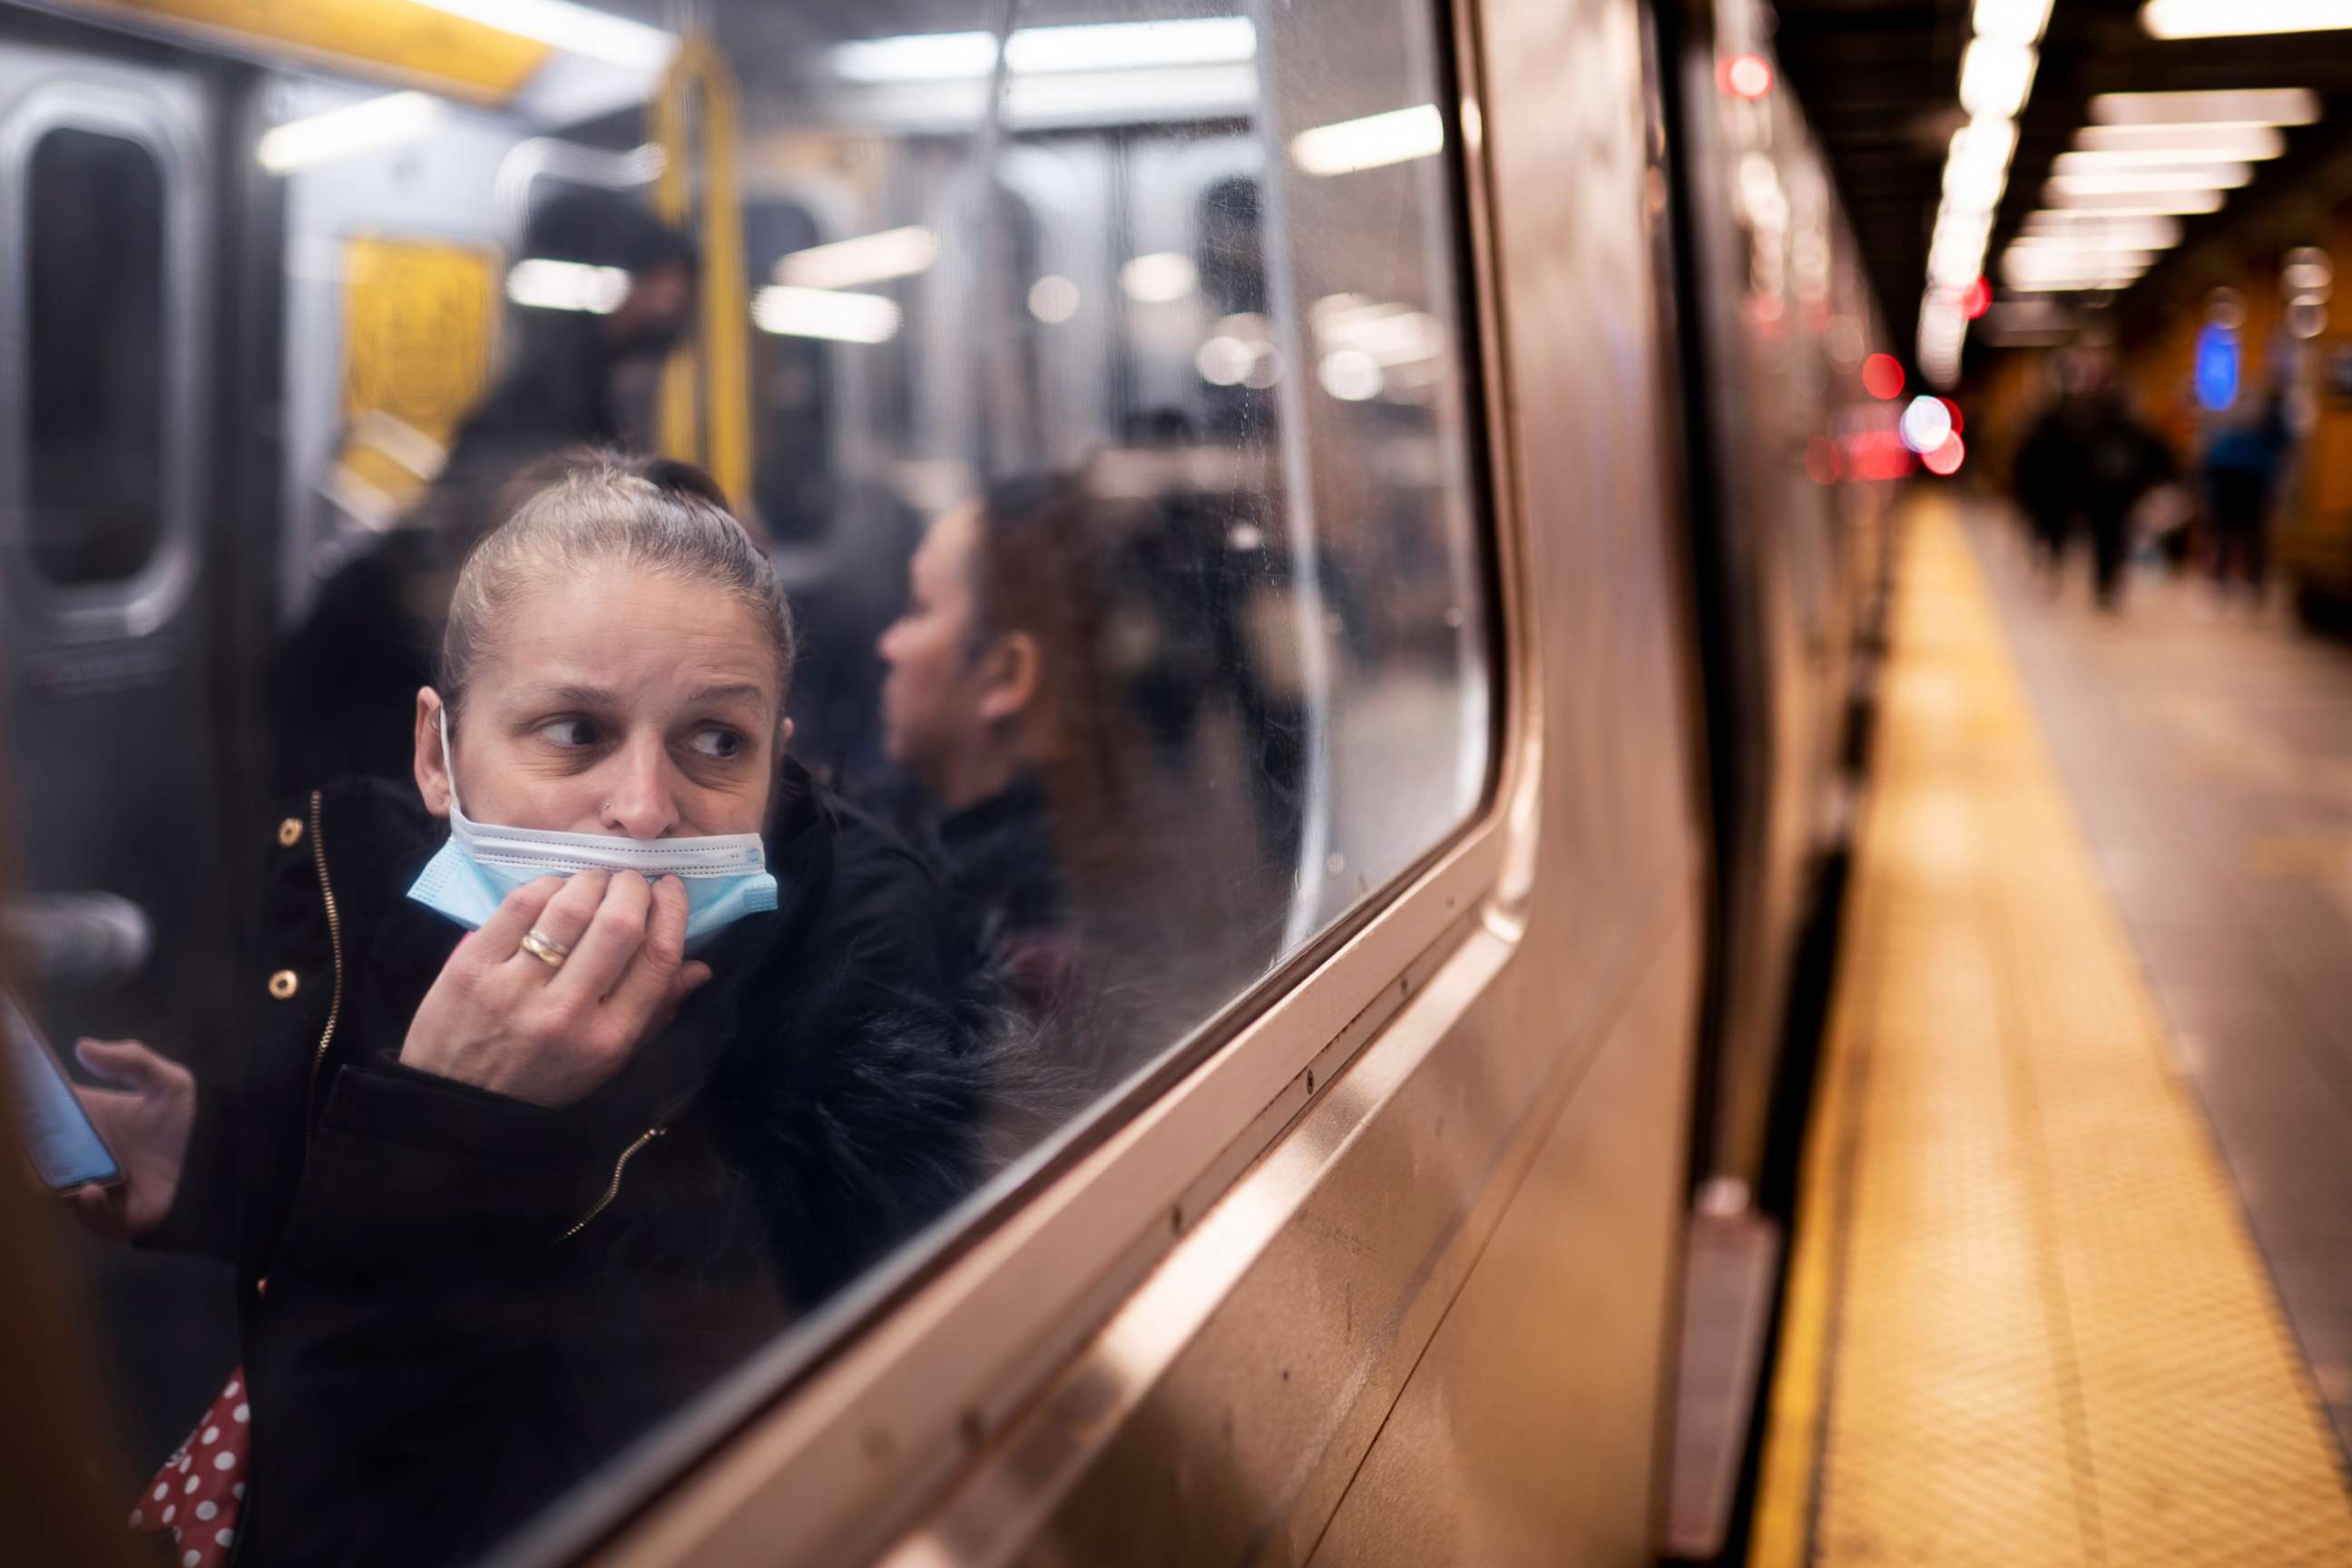 PHOTO: A passenger looks out onto the platform while riding a northbound train in 36th Street subway station where a shooting attack occurred the previous day during the morning commute, April 13, 2022, in New York. 